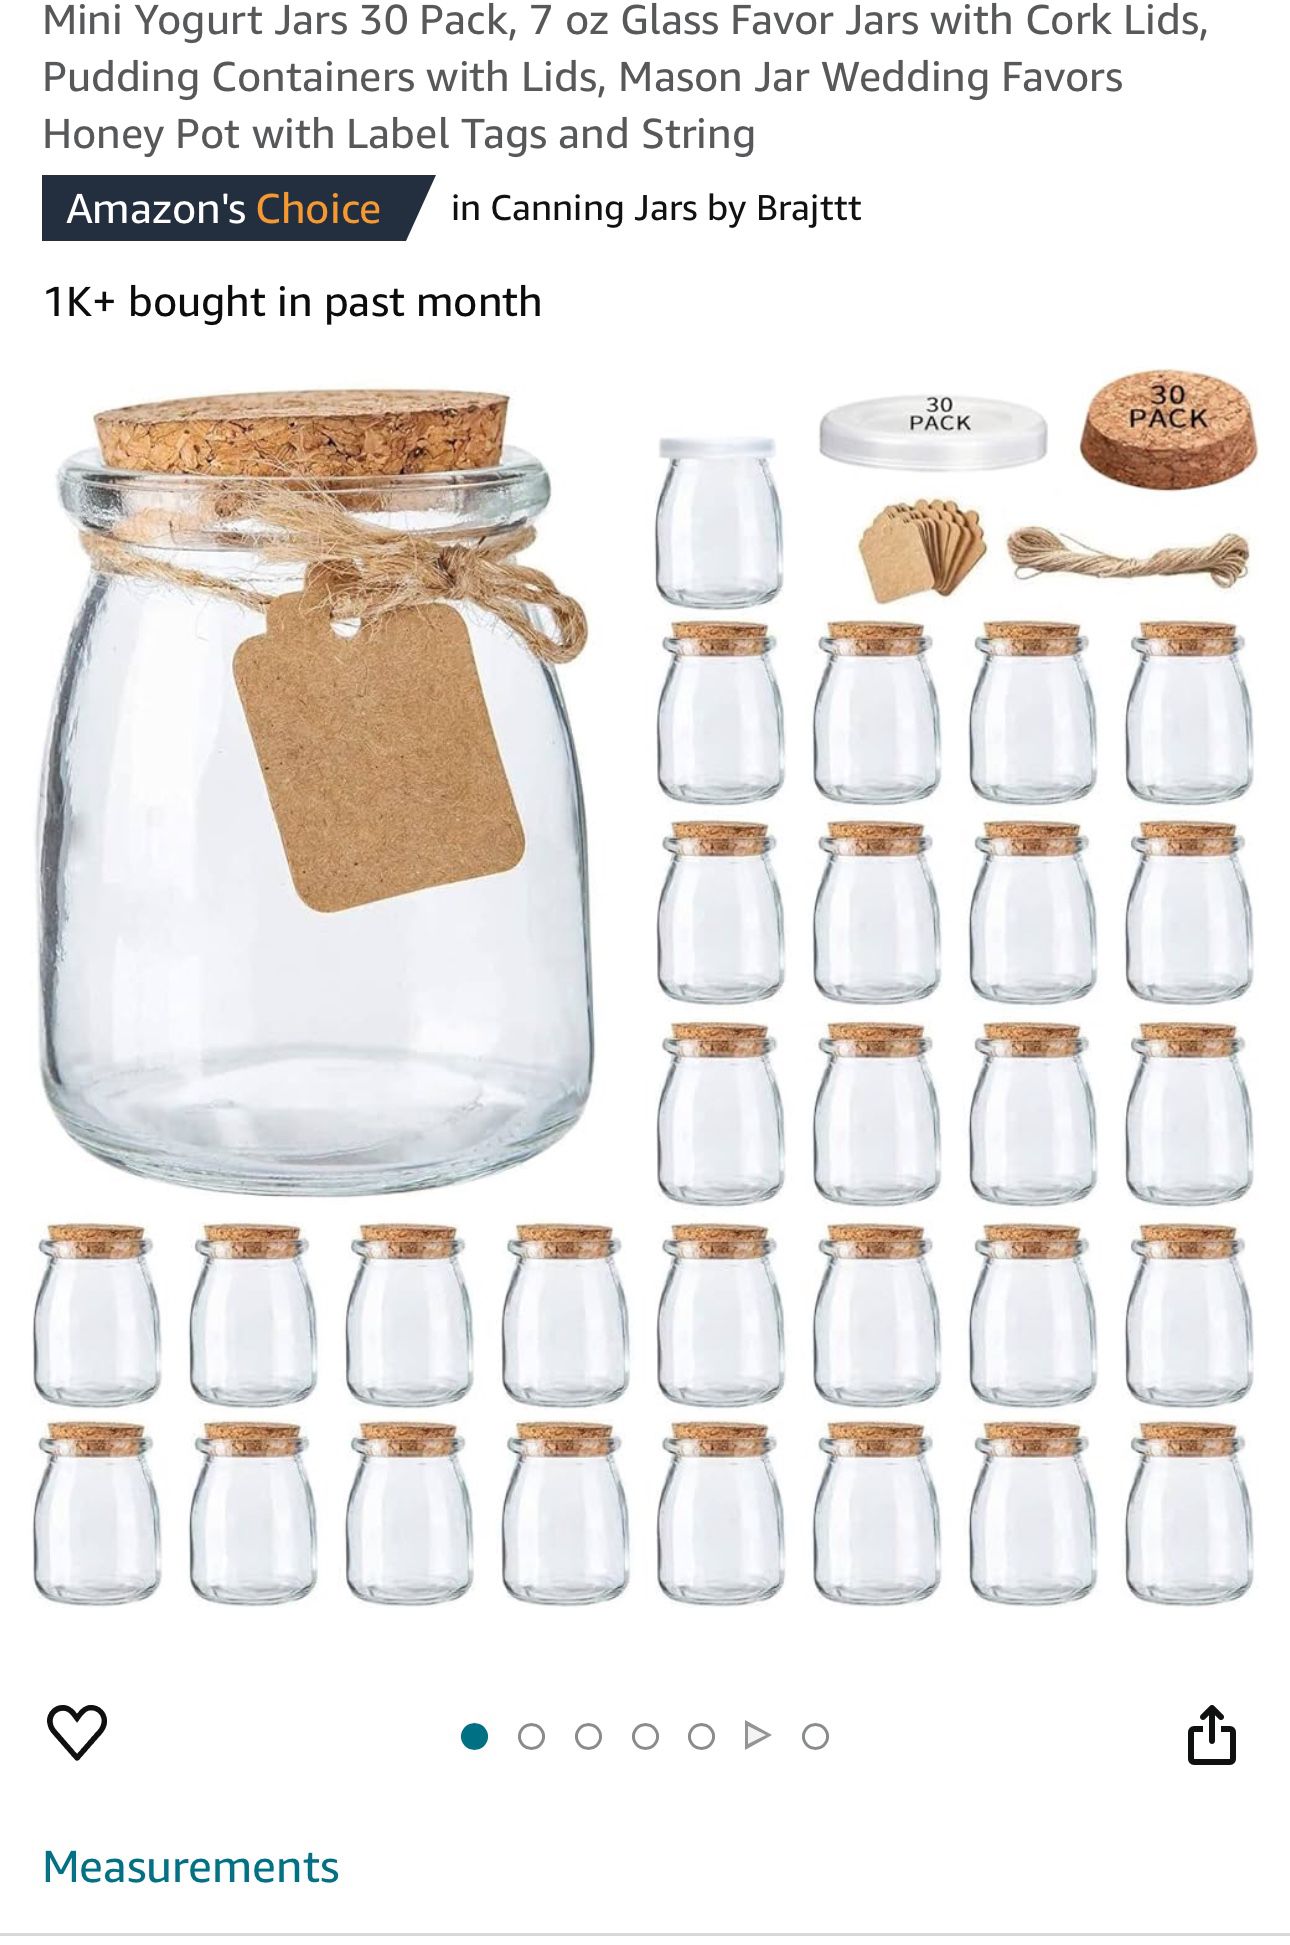 Mini Yogurt Jars 30 Pack, 7 oz Glass Favor Jars with Cork Lids, Pudding Containers with Lids, Mason Jar Wedding Favors Honey Pot with Label Tags and S